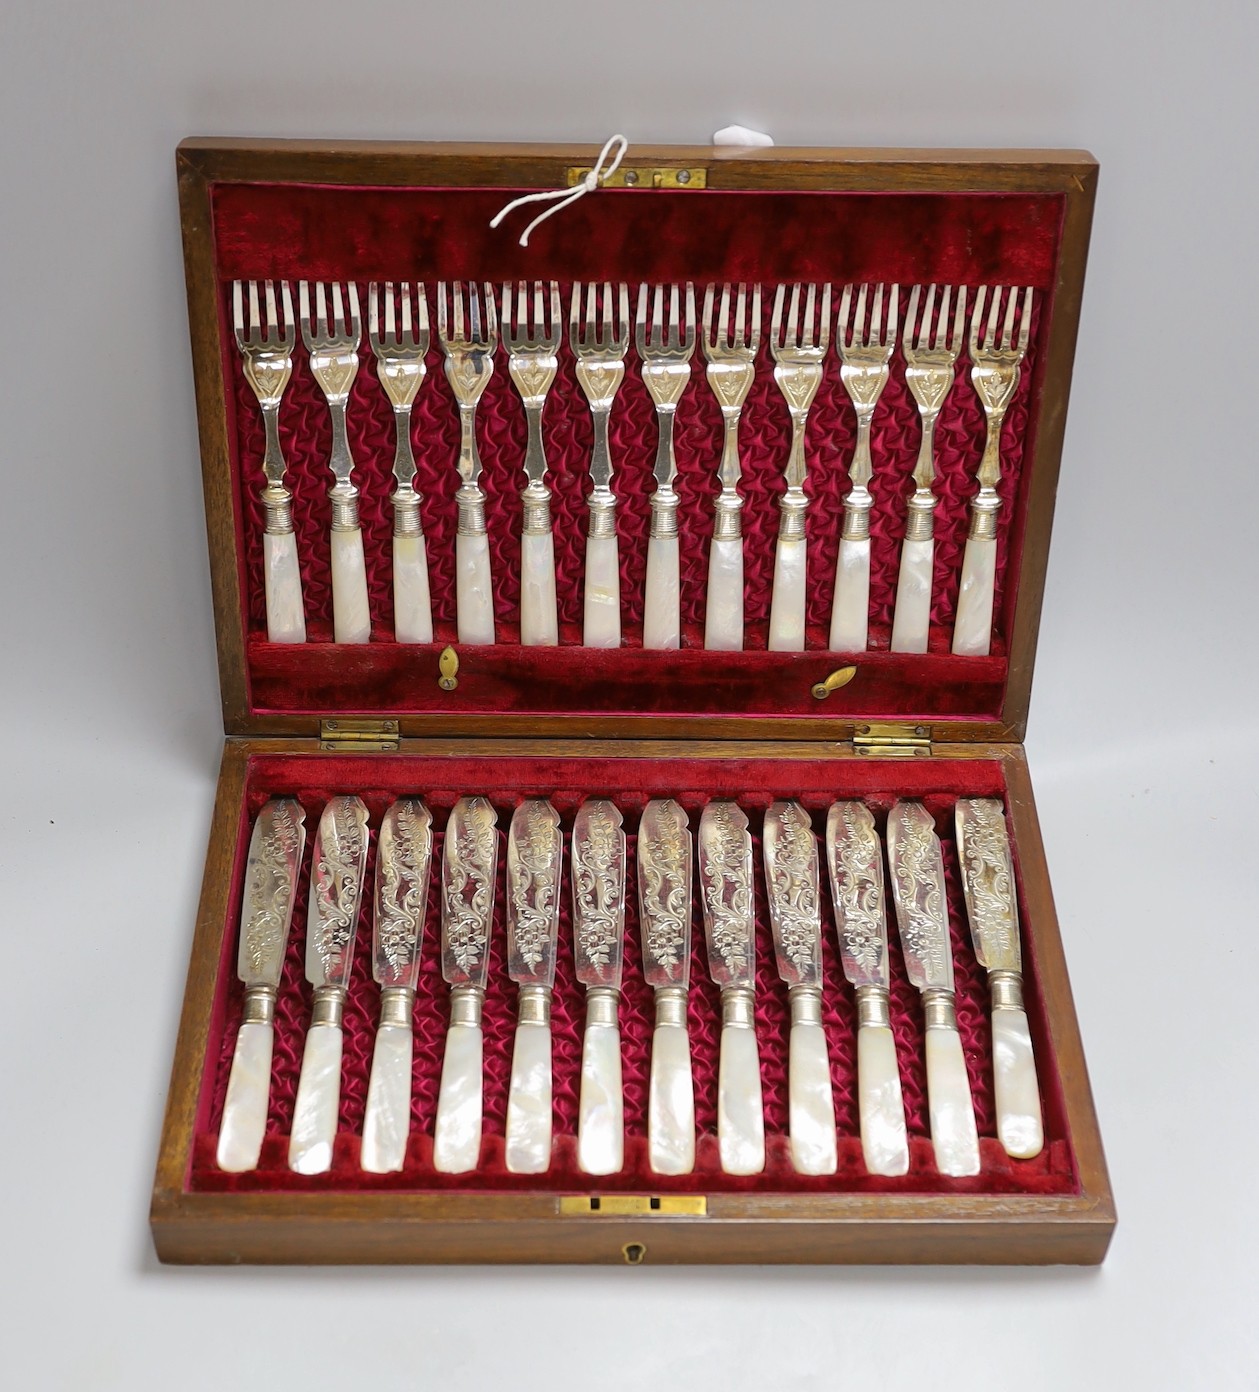 Twelve pairs of silver plated fish knives and forks with mother of pearl handles, in wooden canteen